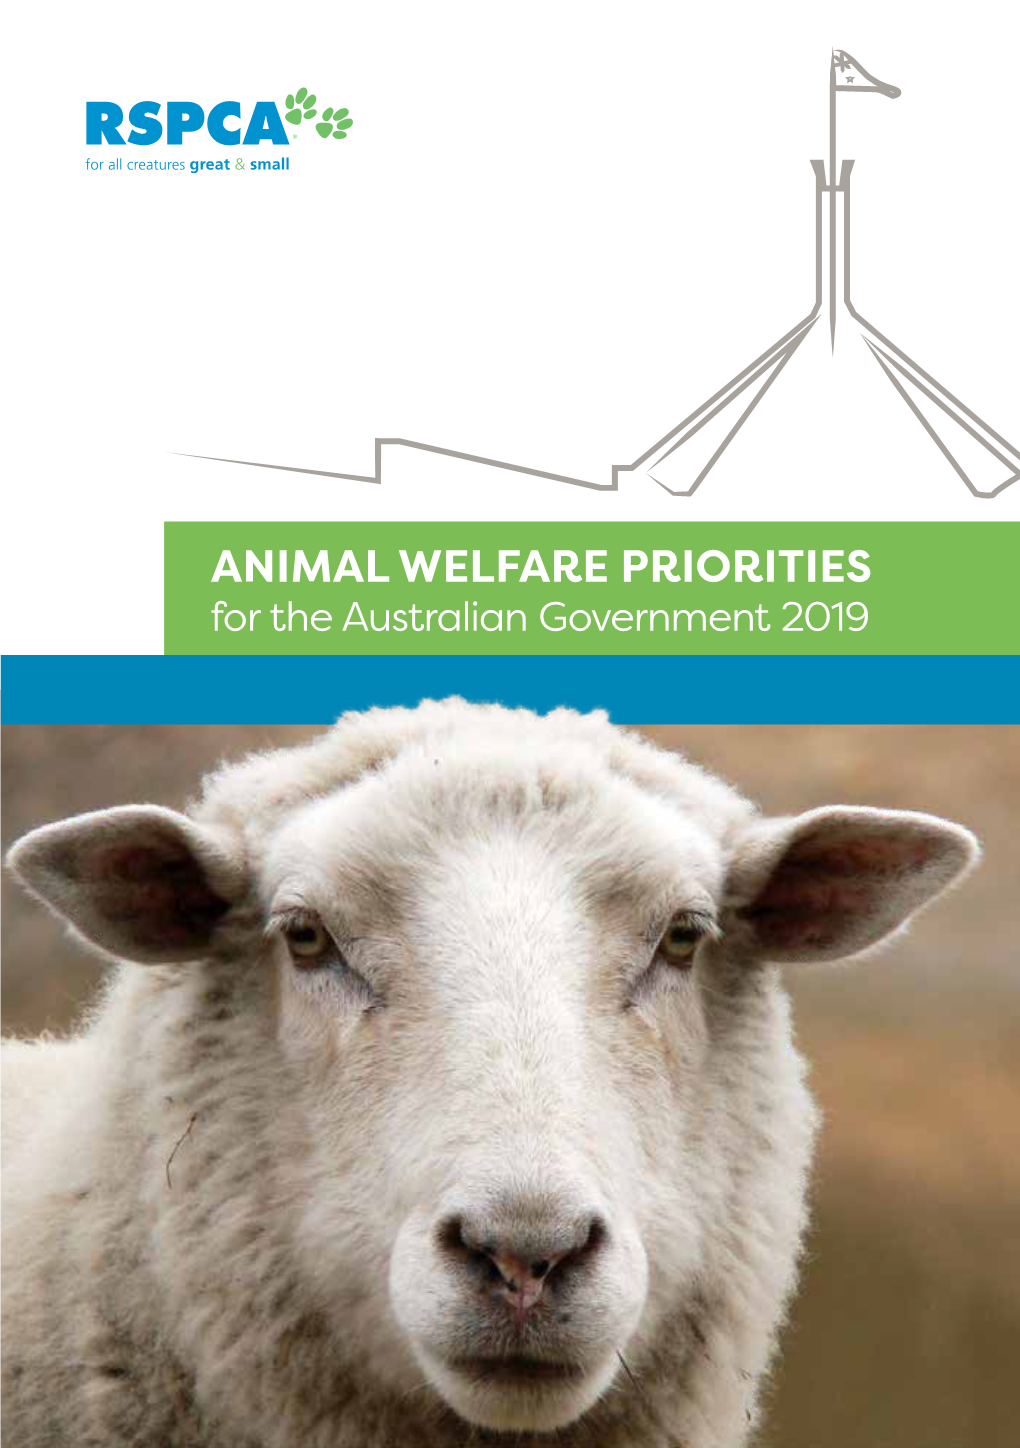 ANIMAL WELFARE PRIORITIES for the Australian Government 2019 PREVENTING CRUELTY to ANIMALS SINCE 1871